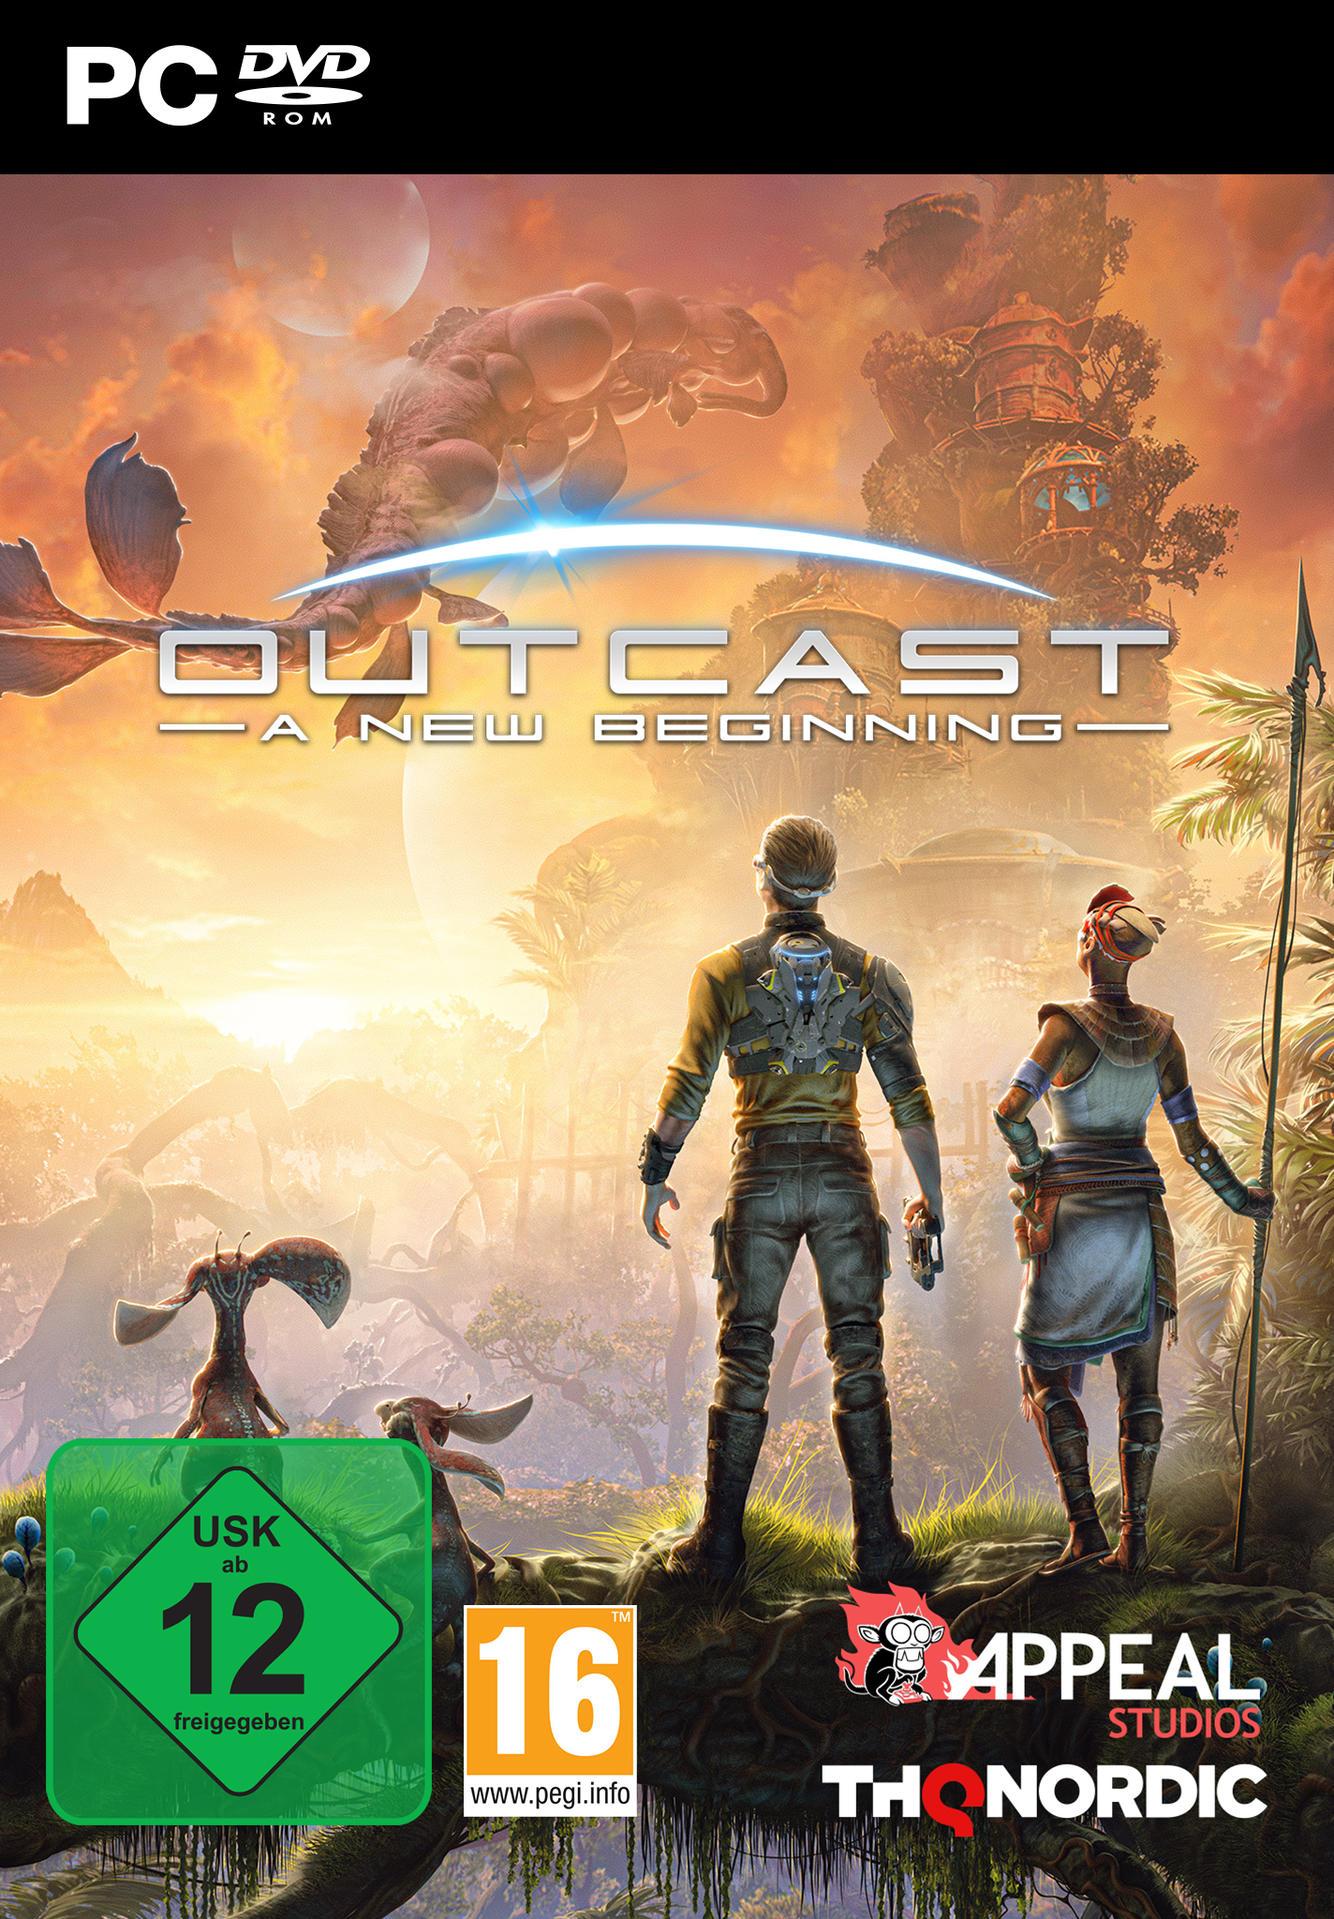 - [PC] New Beginning Outcast A -